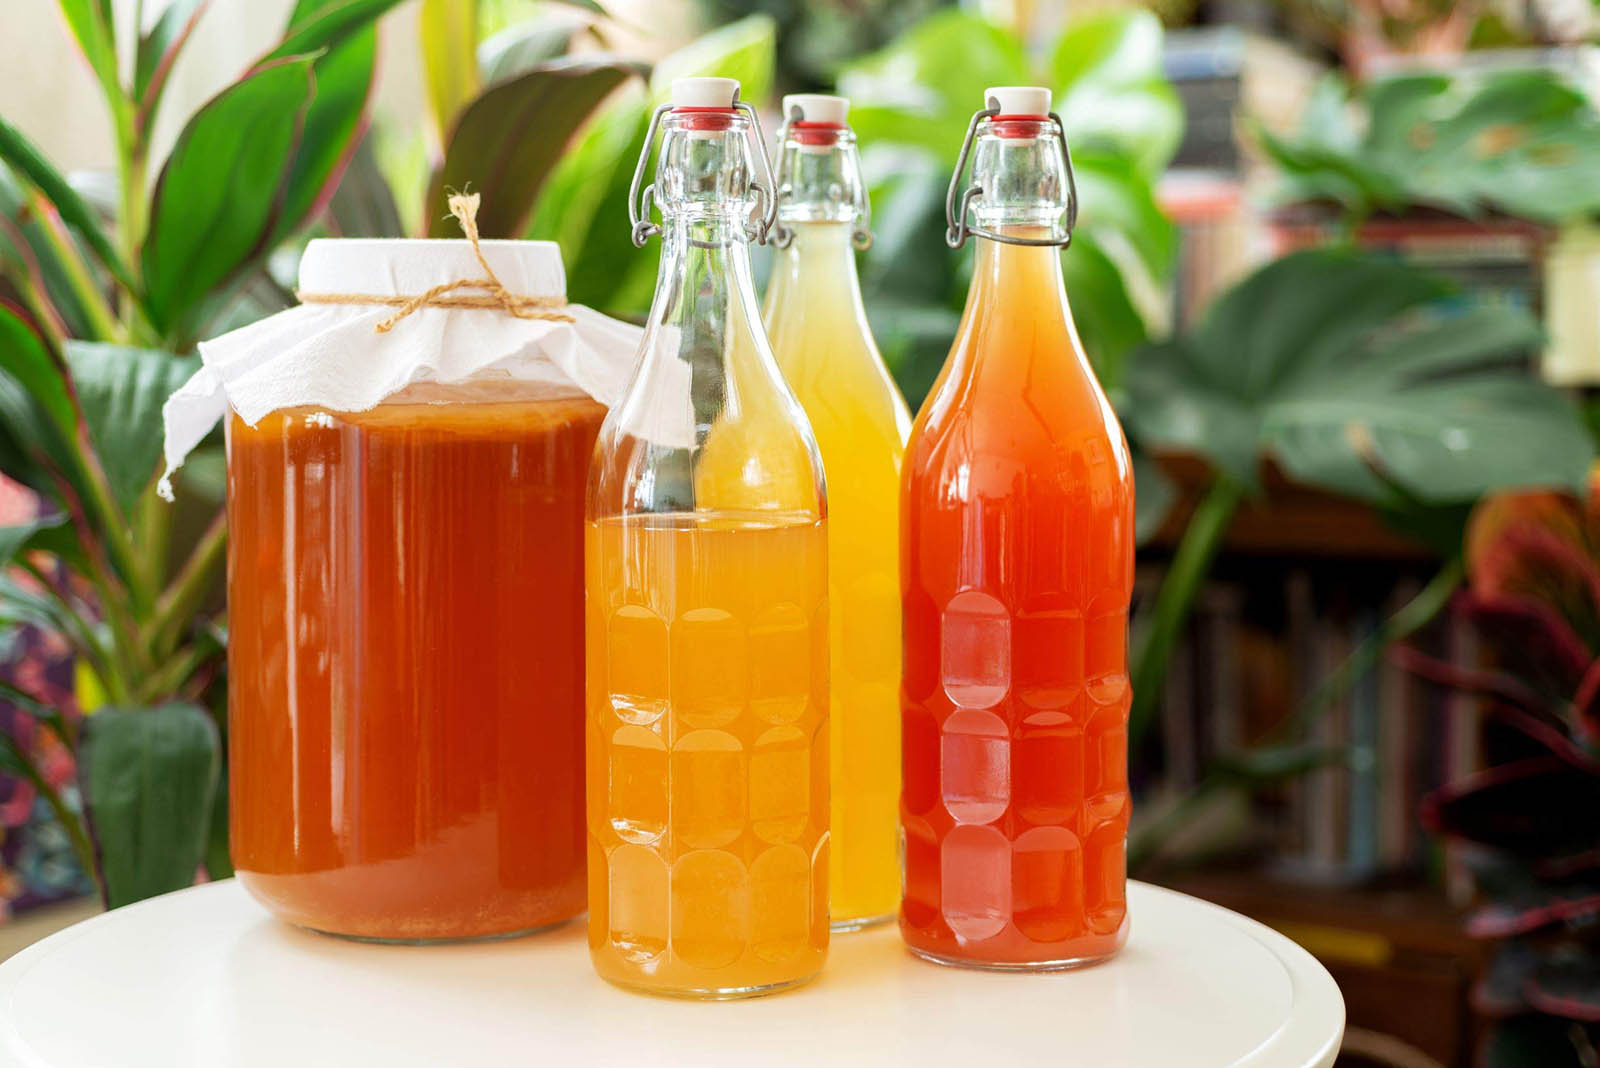 🥗 How Many of These Healthy Food Trends Have You Tried? Kombucha